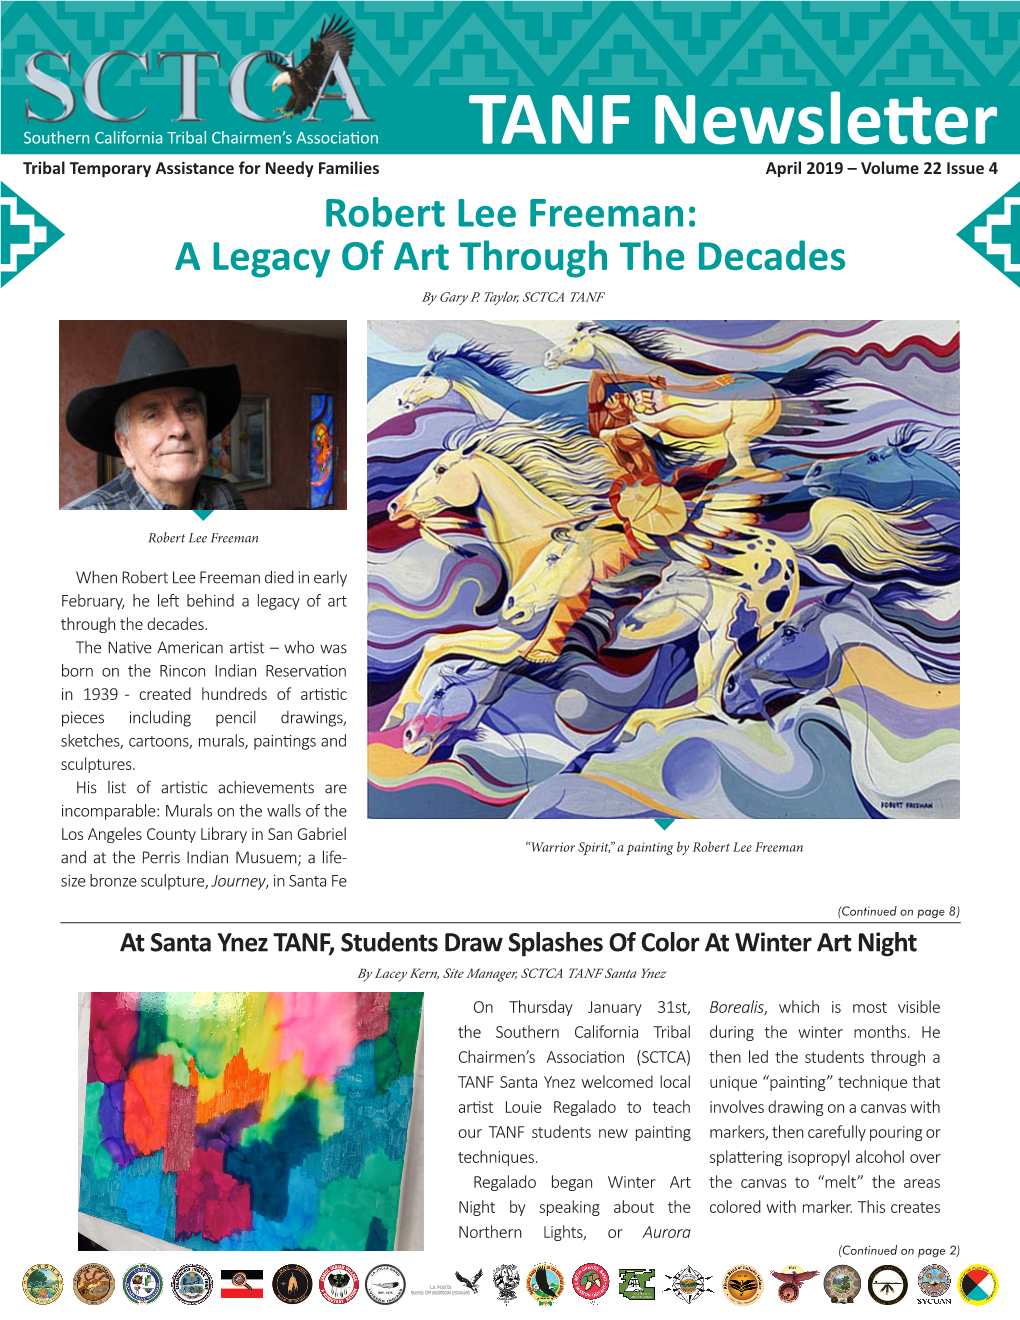 TANF Newsletter Tribal Temporary Assistance for Needy Families April 2019 – Volume 22 Issue 4 Robert Lee Freeman: a Legacy of Art Through the Decades